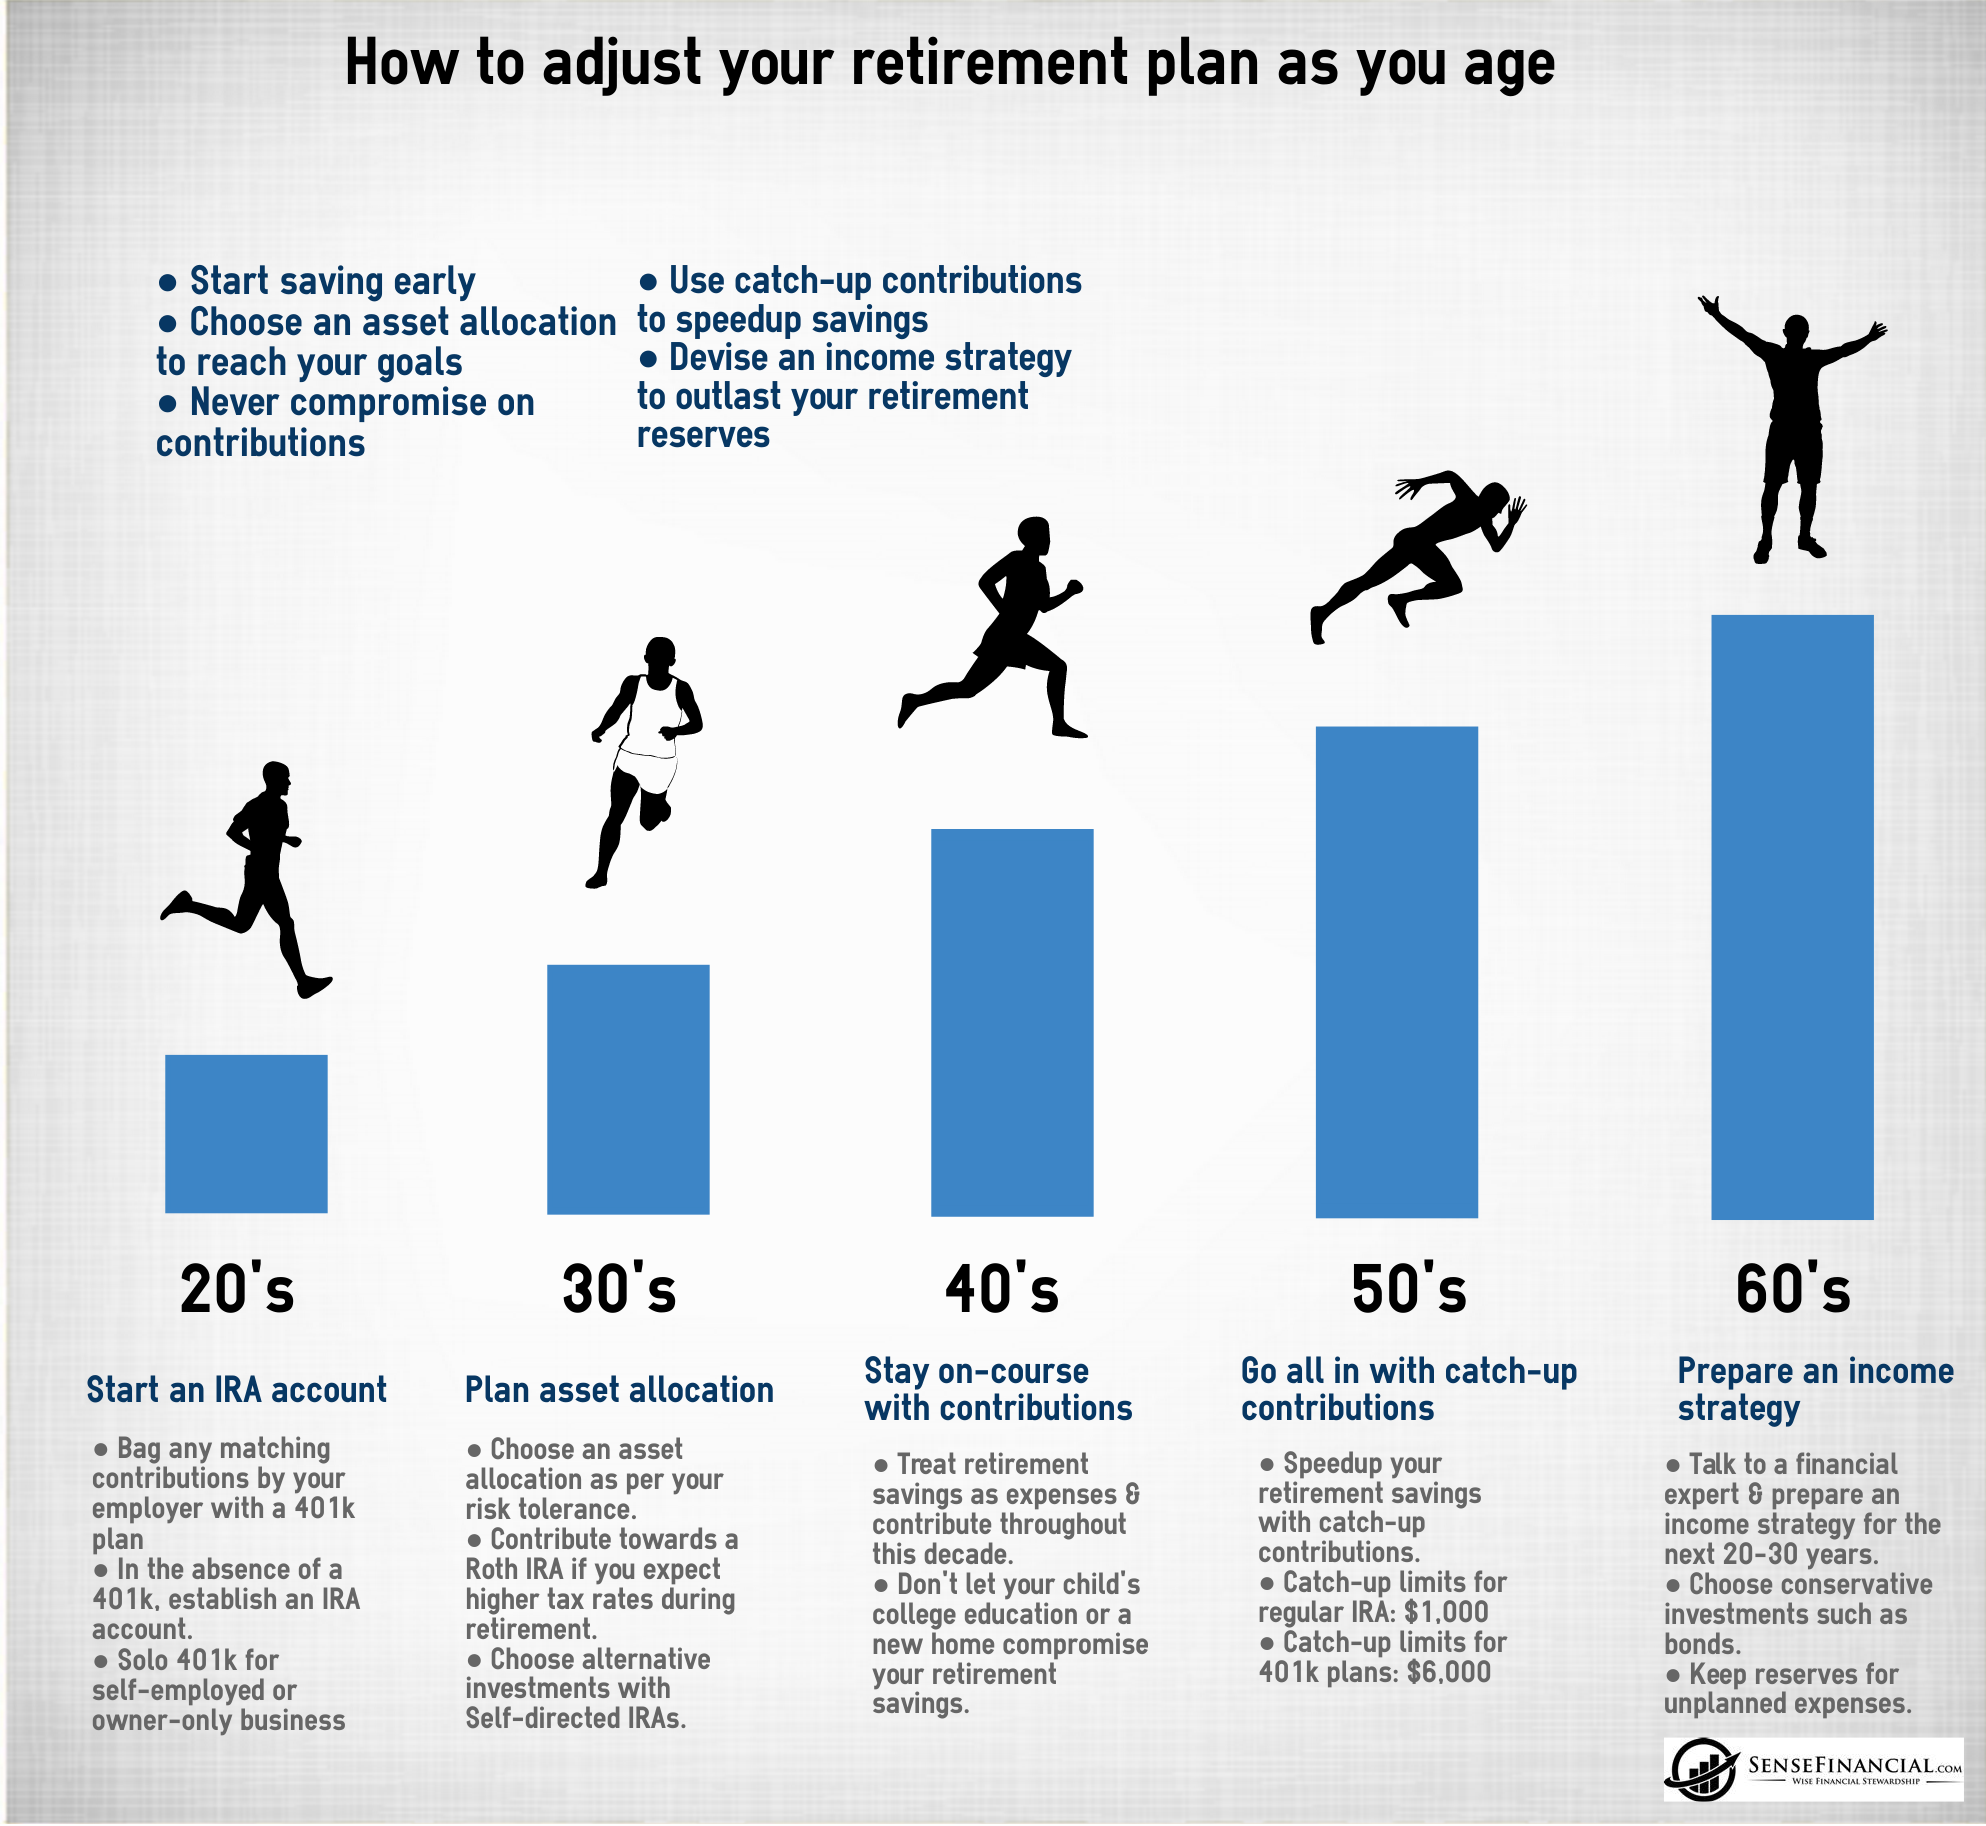 How to Adjust Your Retirement Planning as You Age